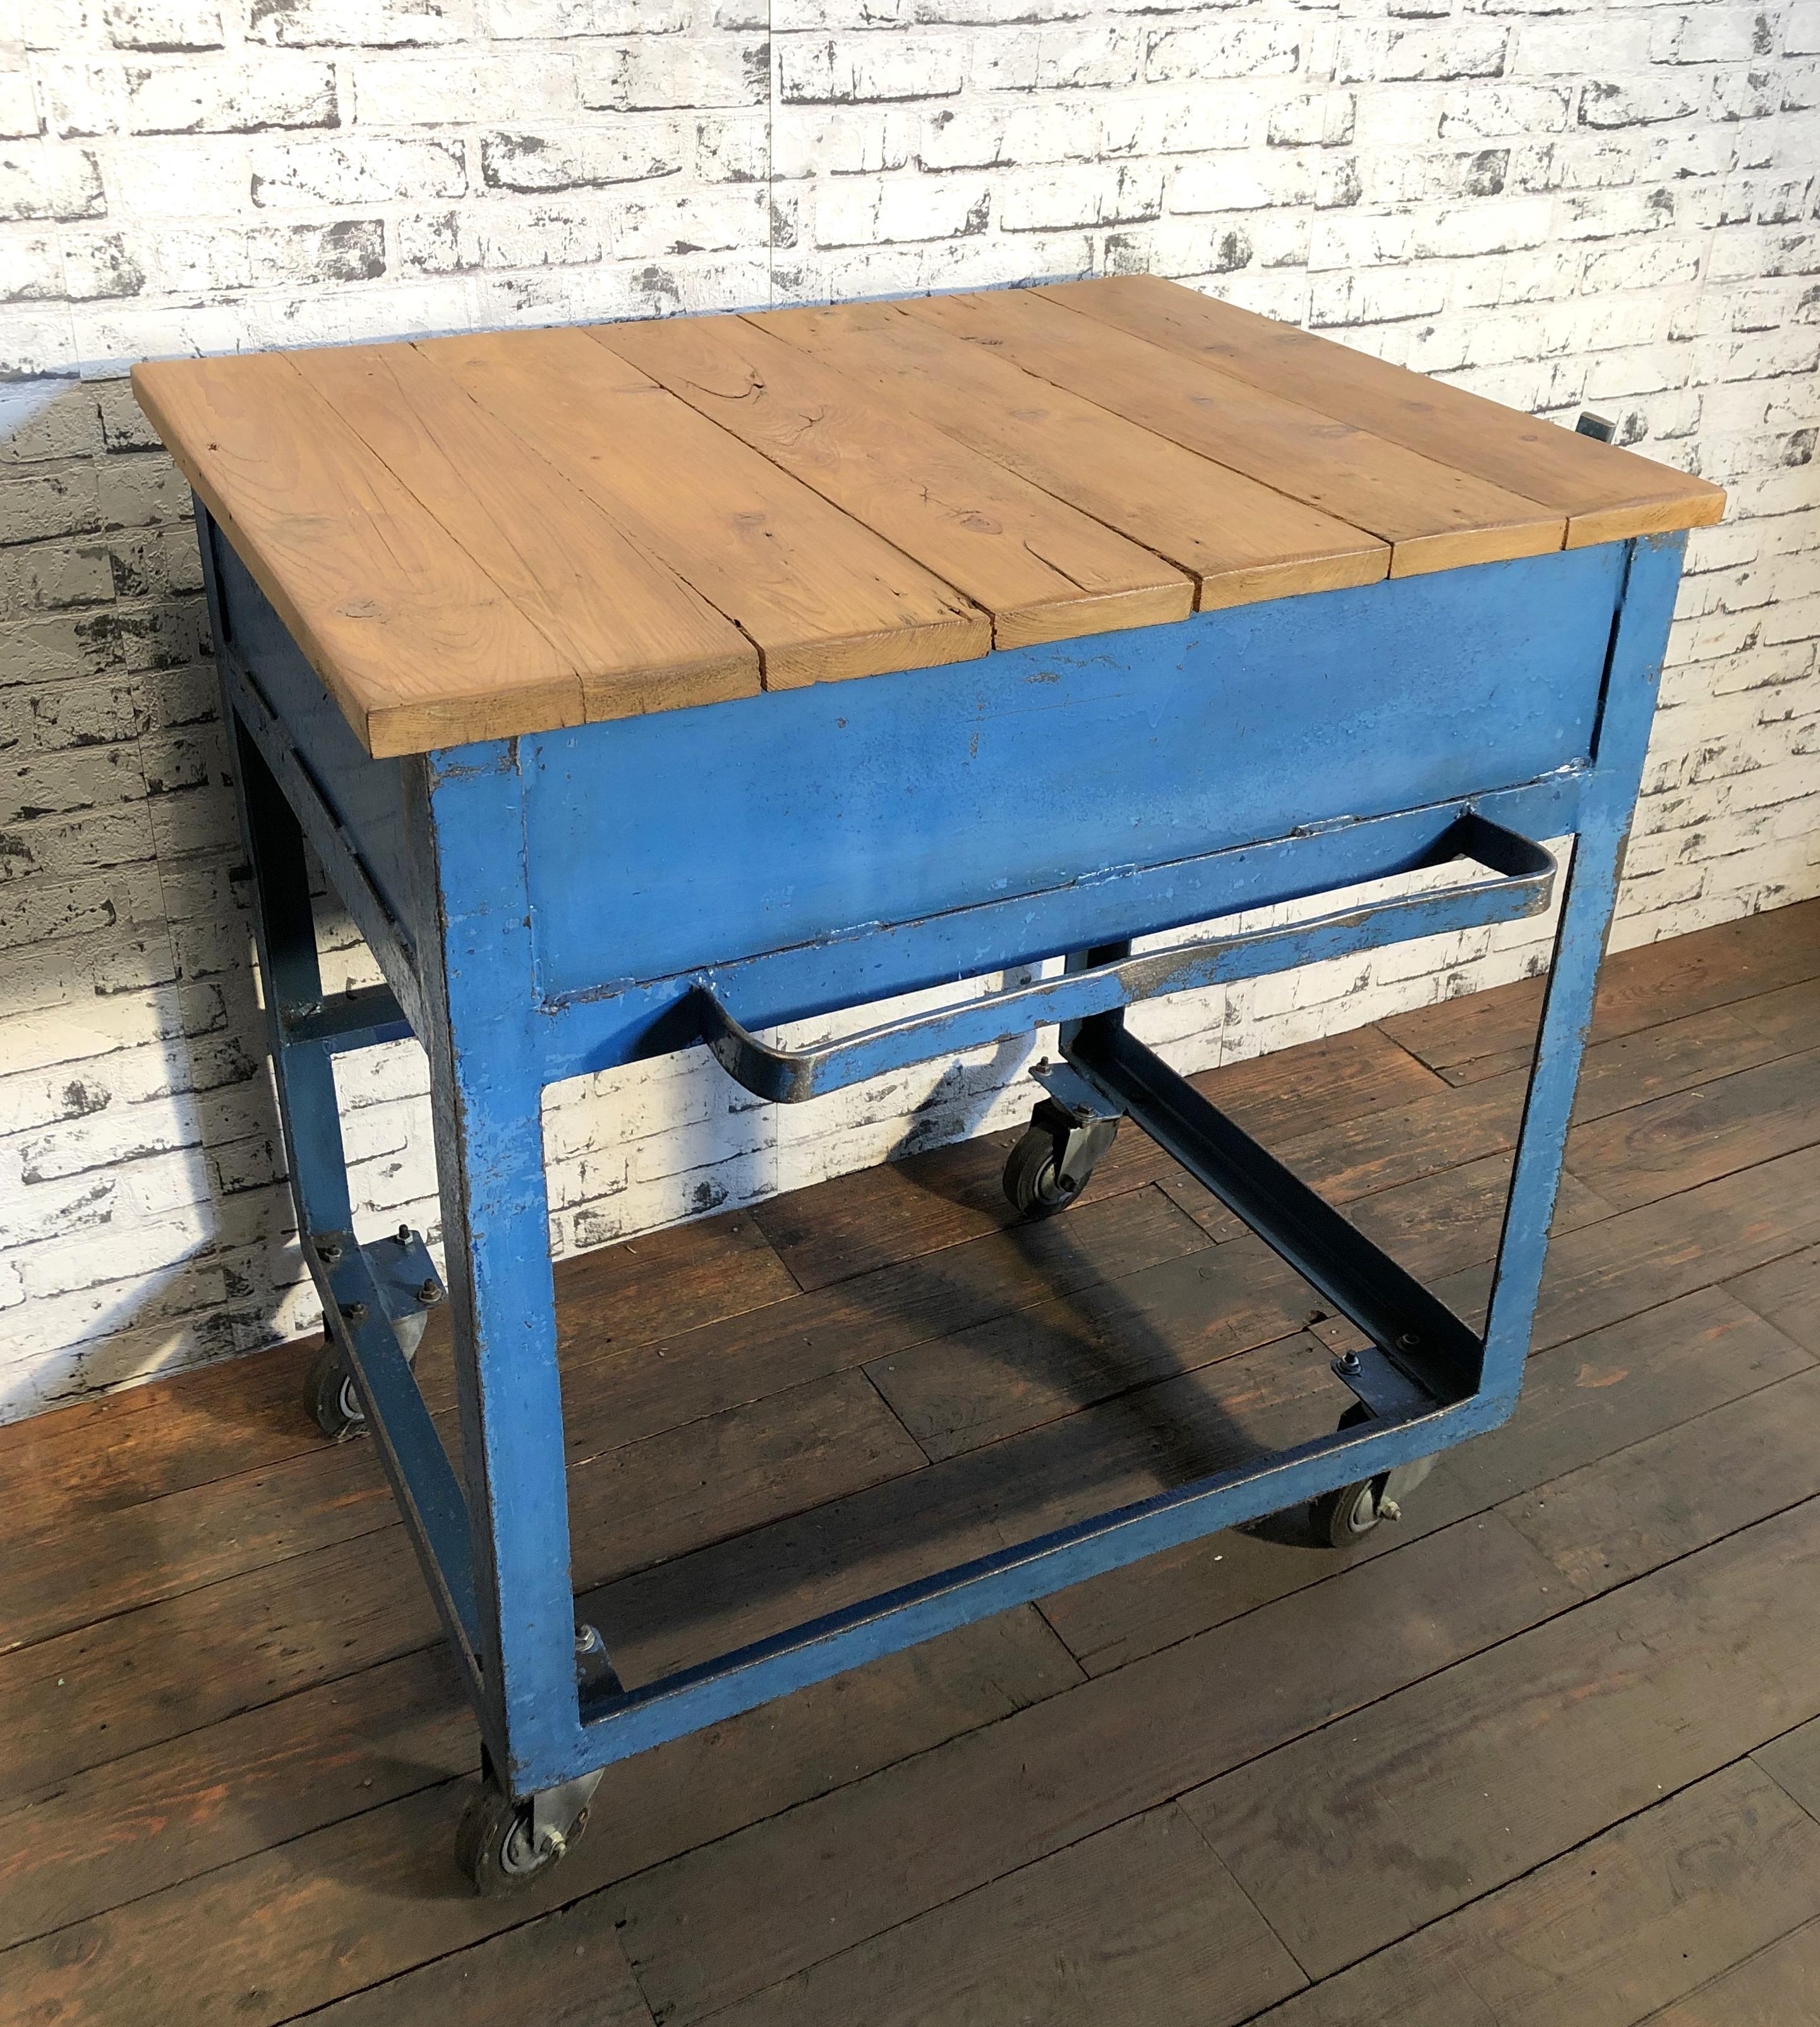 Vintage rolling table from 1950s. It features blue iron construction with four wheels and solid wooden plate.The top plate is hinged and the interior can be used. Weight : 50 kg.